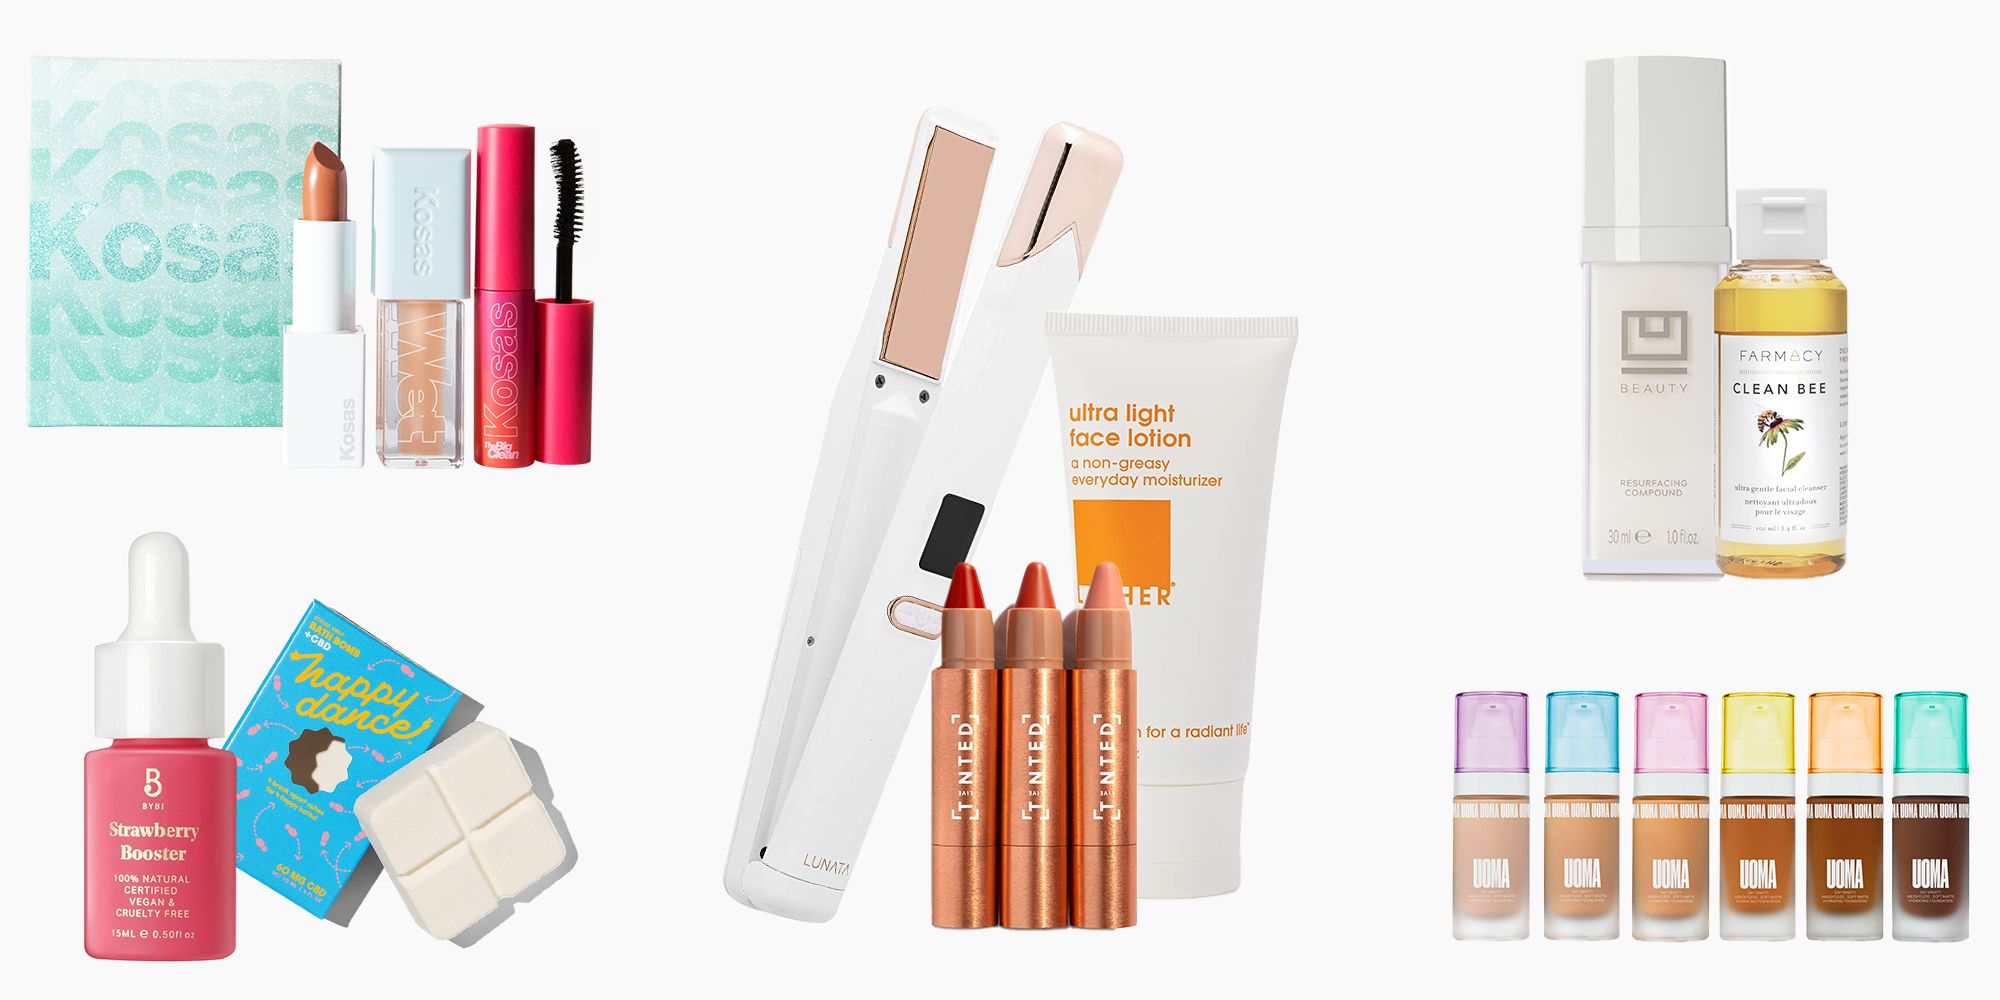 Here are the 30+ Best Black Friday Beauty Deals To Shop Right Now - Flipboard